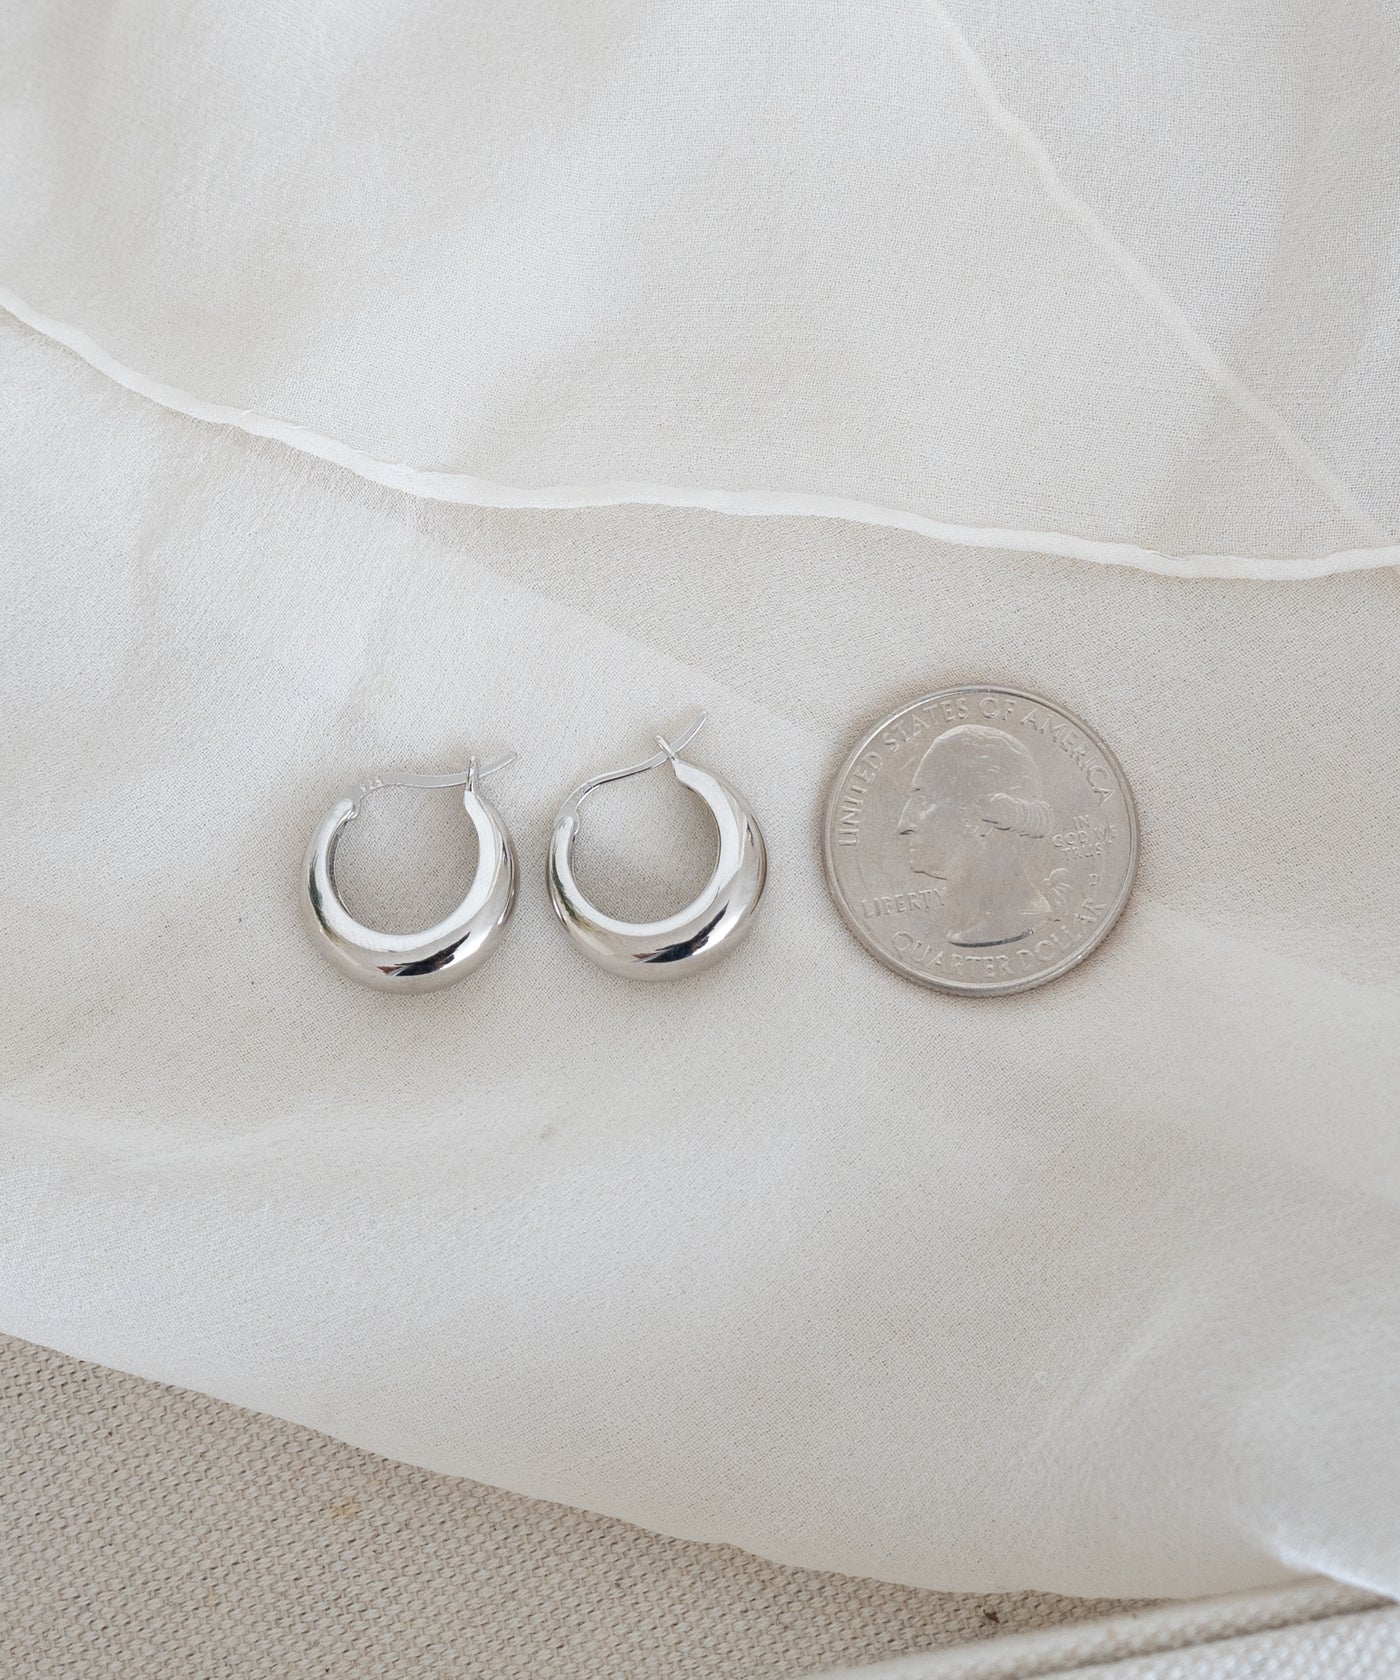 Small Crescent Hoops